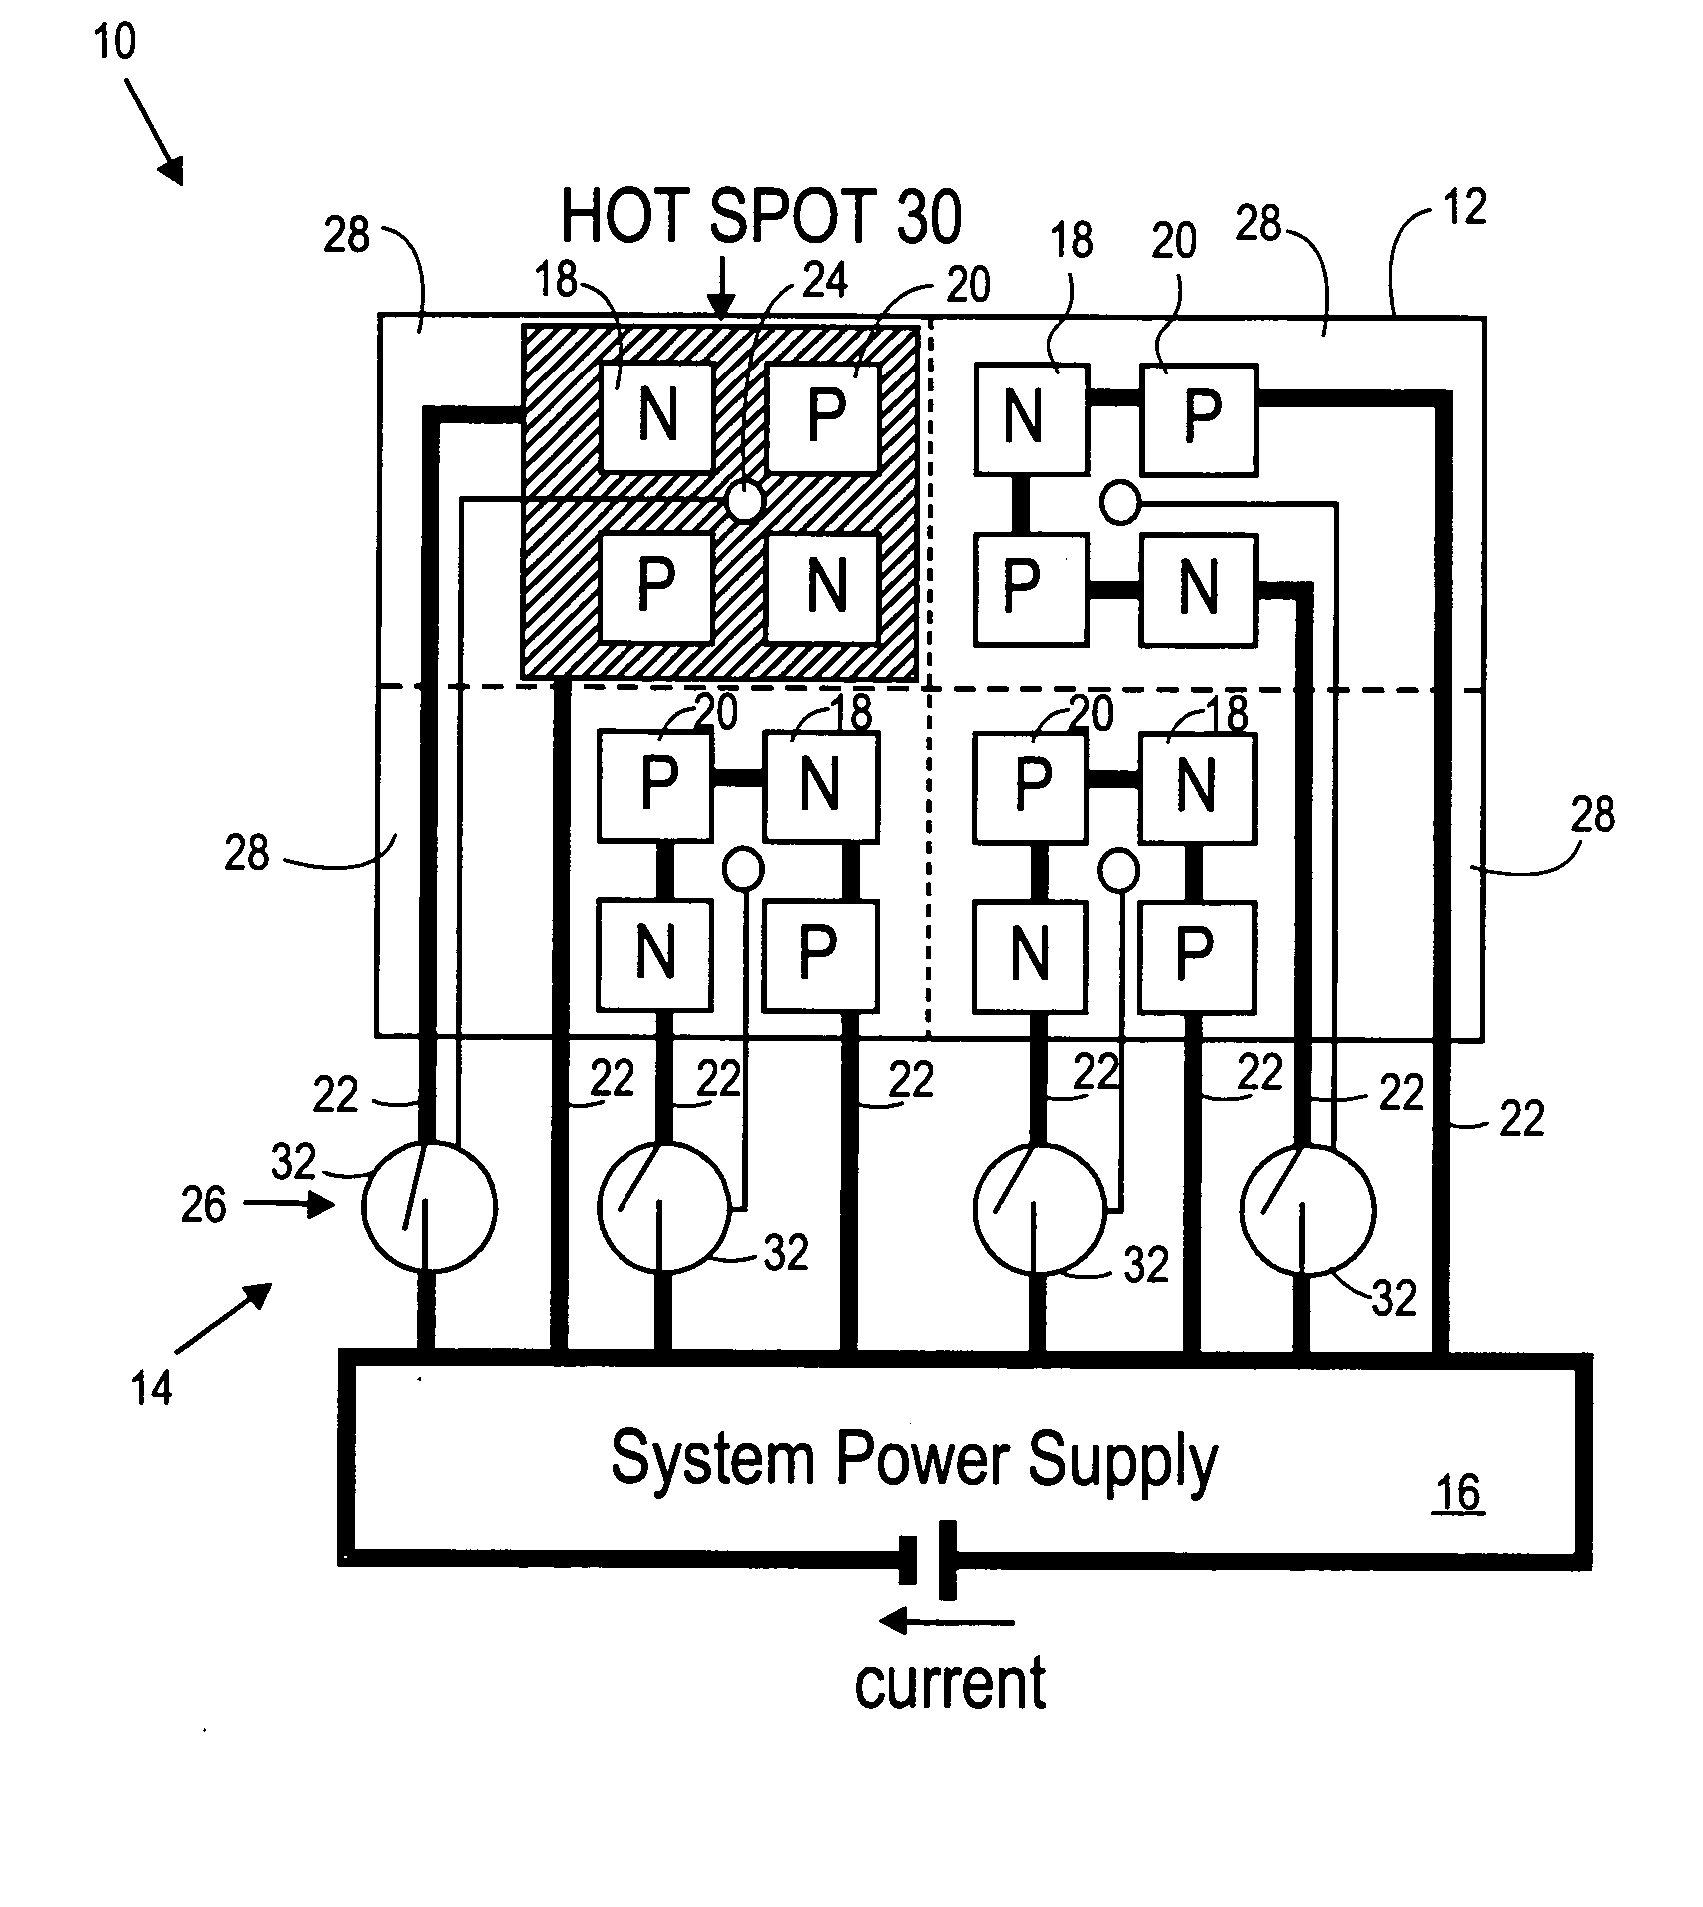 Cooling system for an electronic component